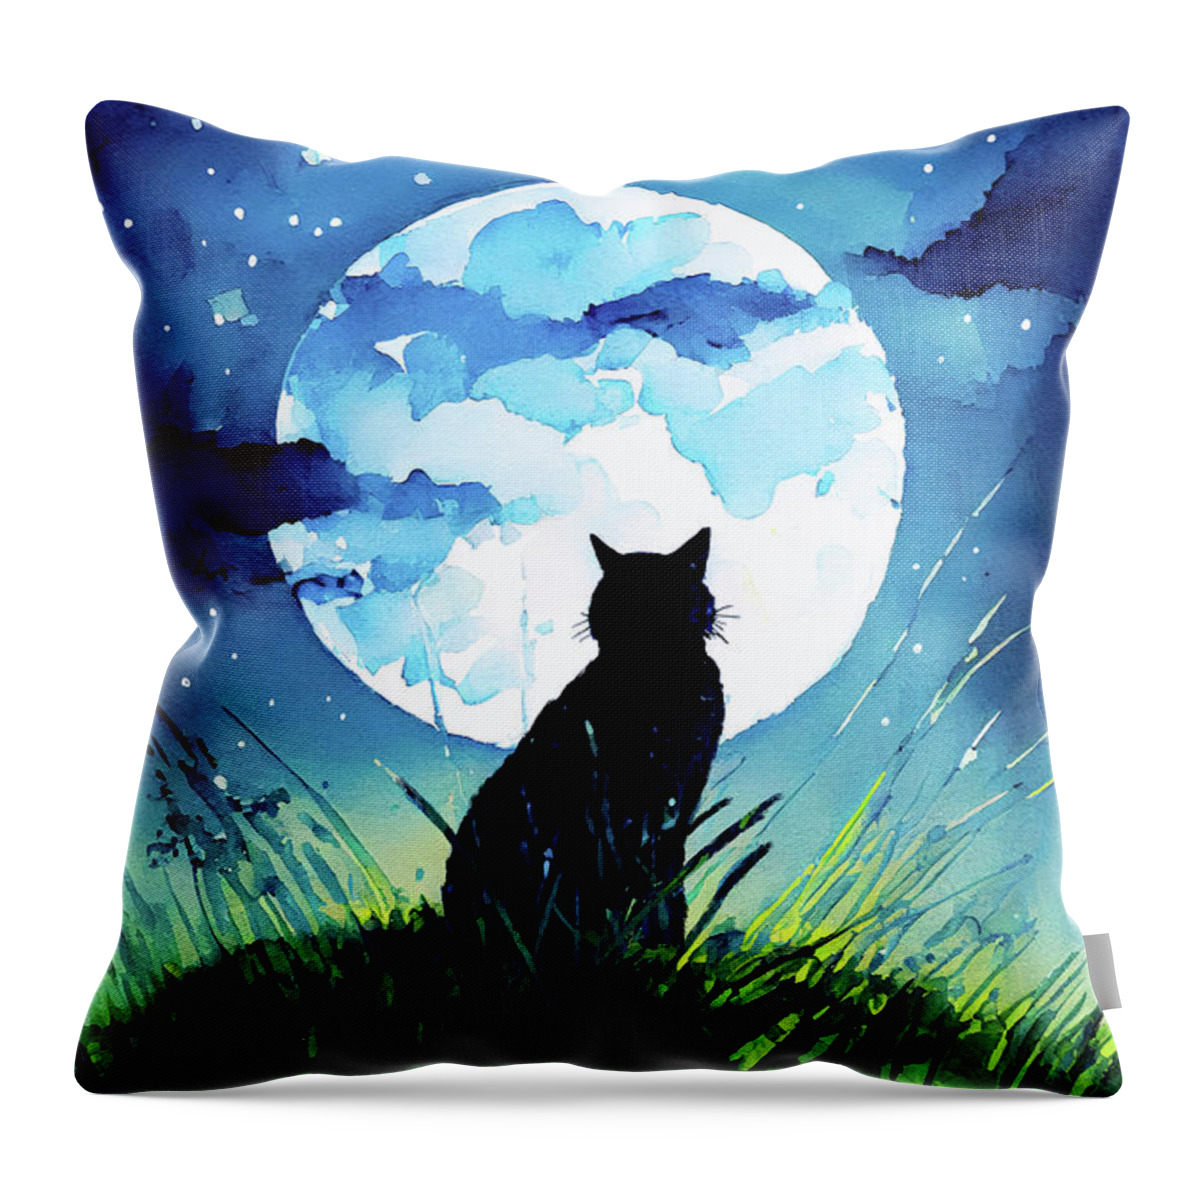 Cats Throw Pillow featuring the digital art Does A Cat Sing To The Moon by Mark Tisdale